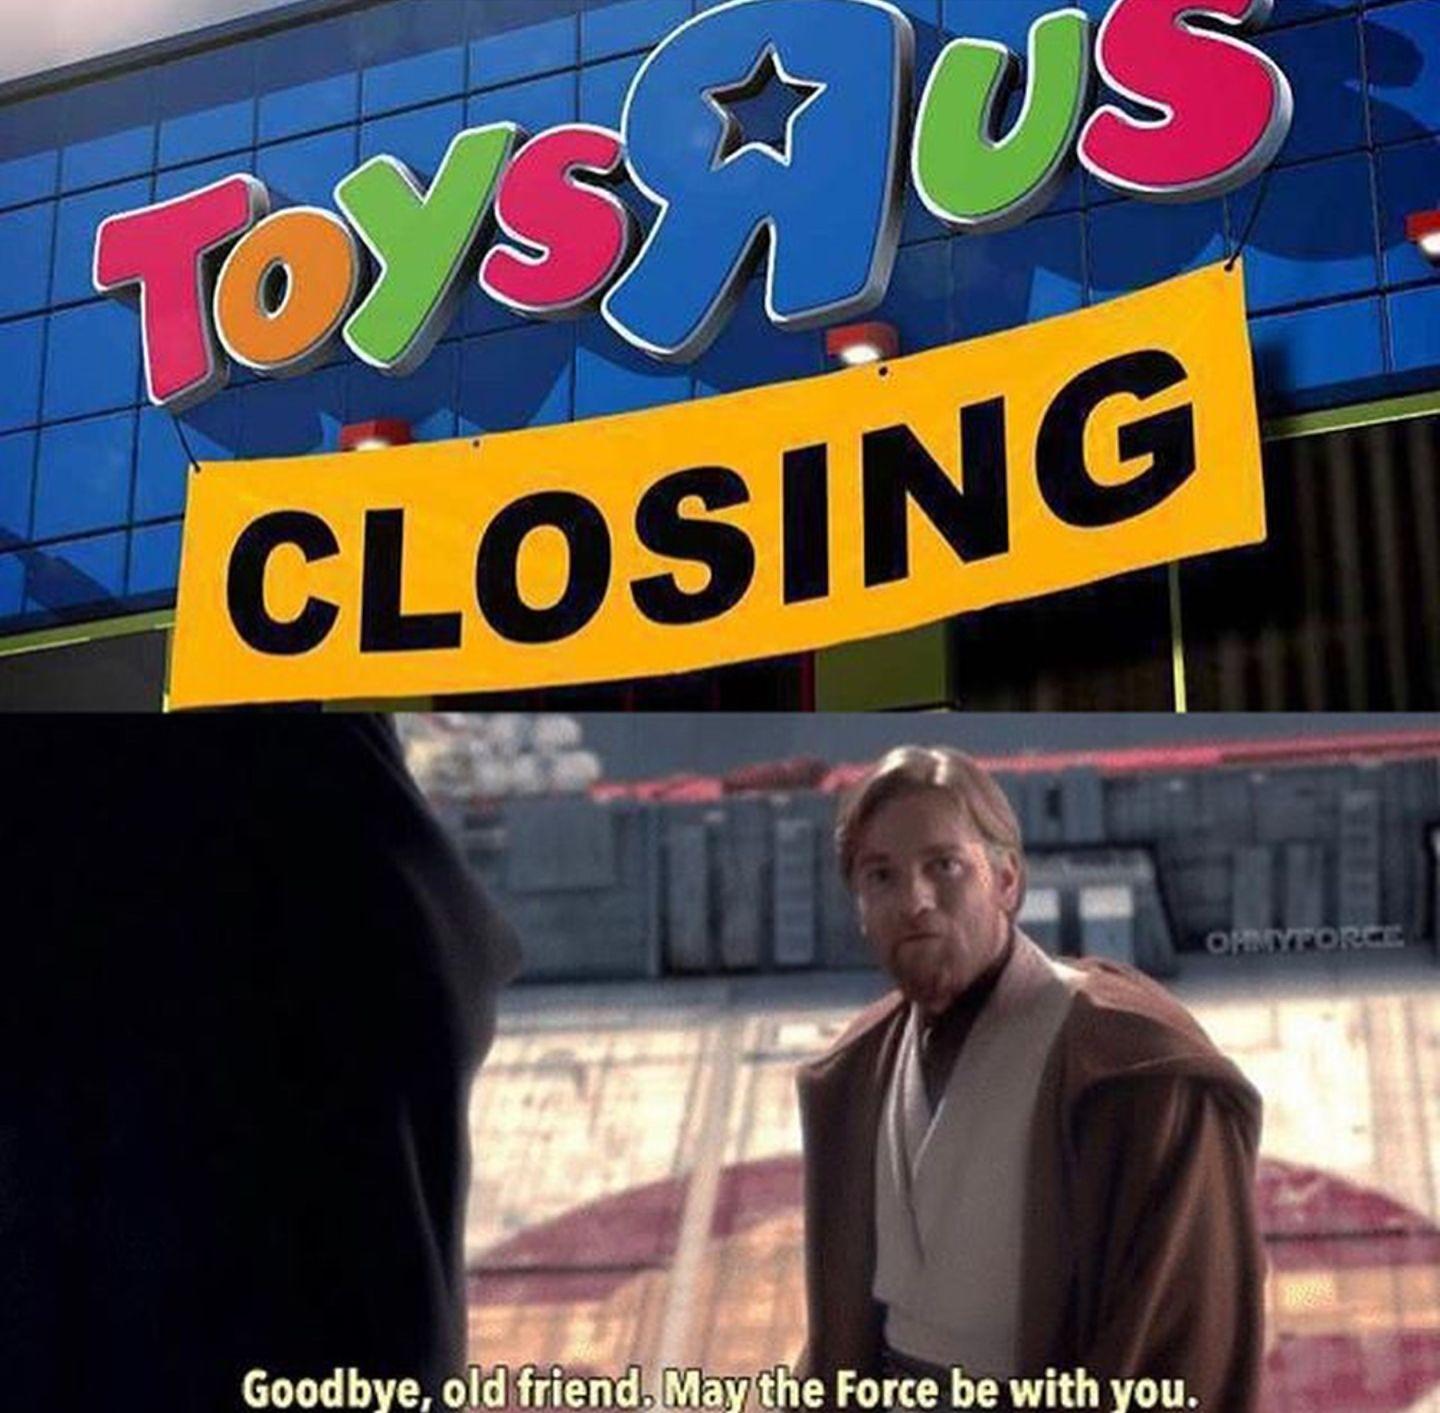 Old Toys R Us Logo - Goodbye Toys R Us and may the Force be with you. : PrequelMemes